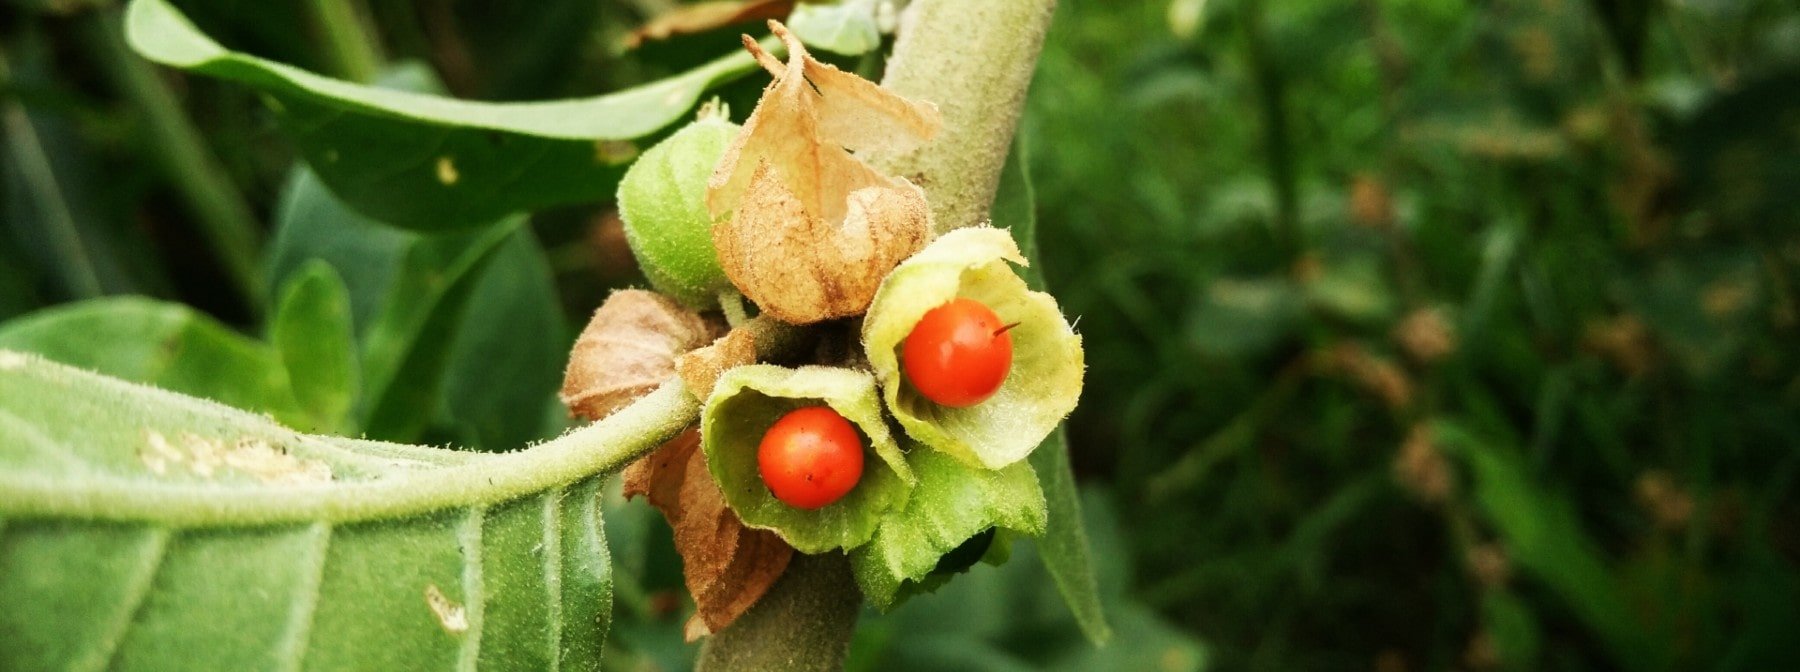 Ashwagandha: The Benefits, Side Effects & Uses